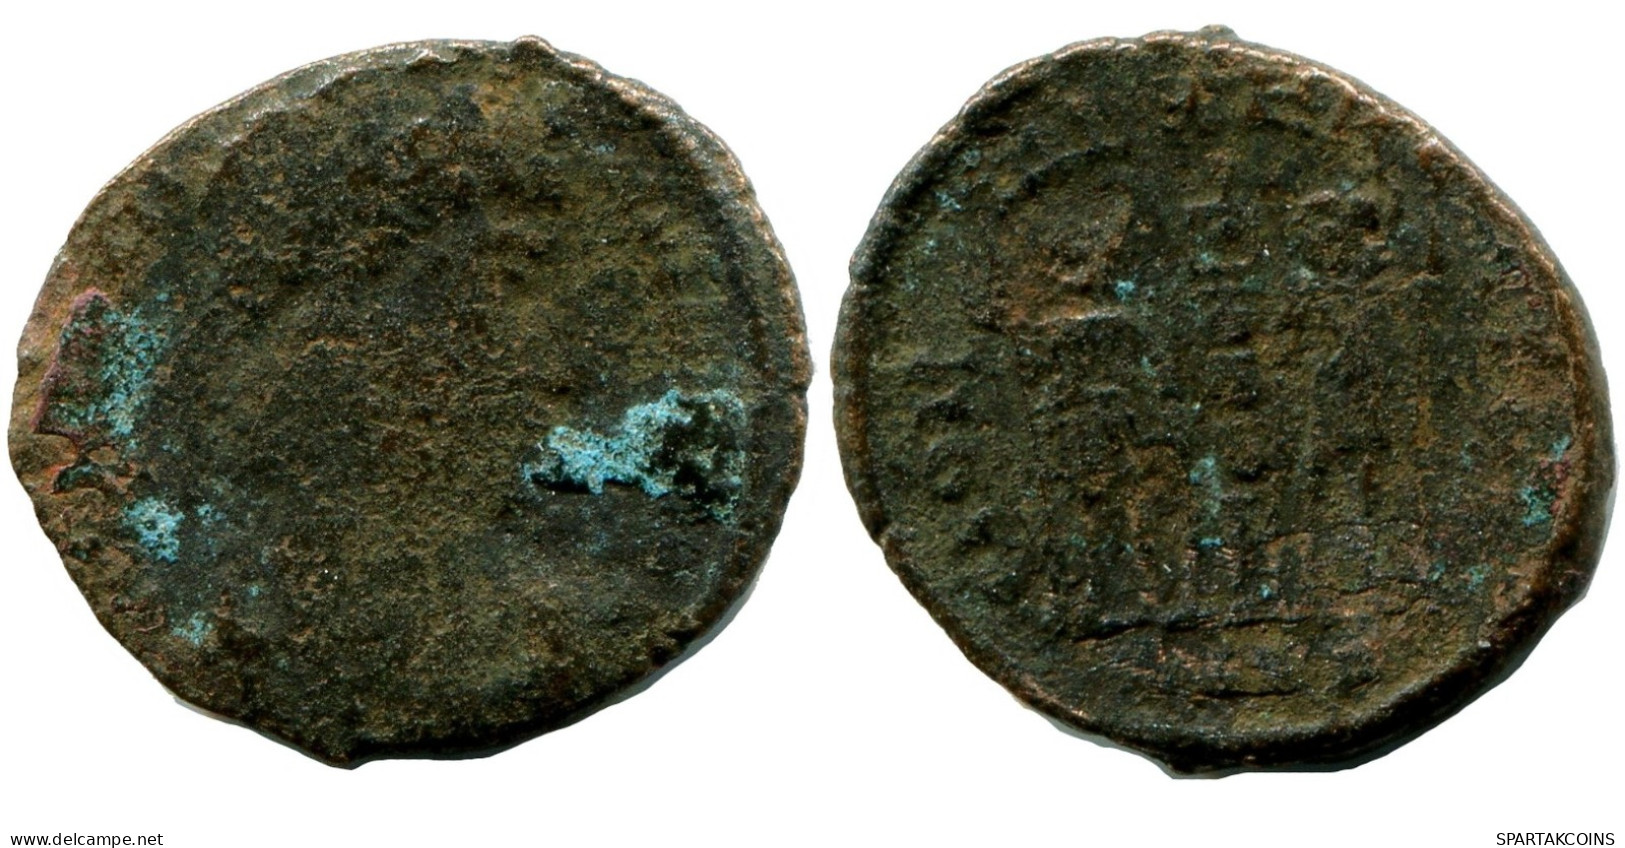 ROMAN Coin MINTED IN CYZICUS FROM THE ROYAL ONTARIO MUSEUM #ANC11042.14.D.A - The Christian Empire (307 AD Tot 363 AD)